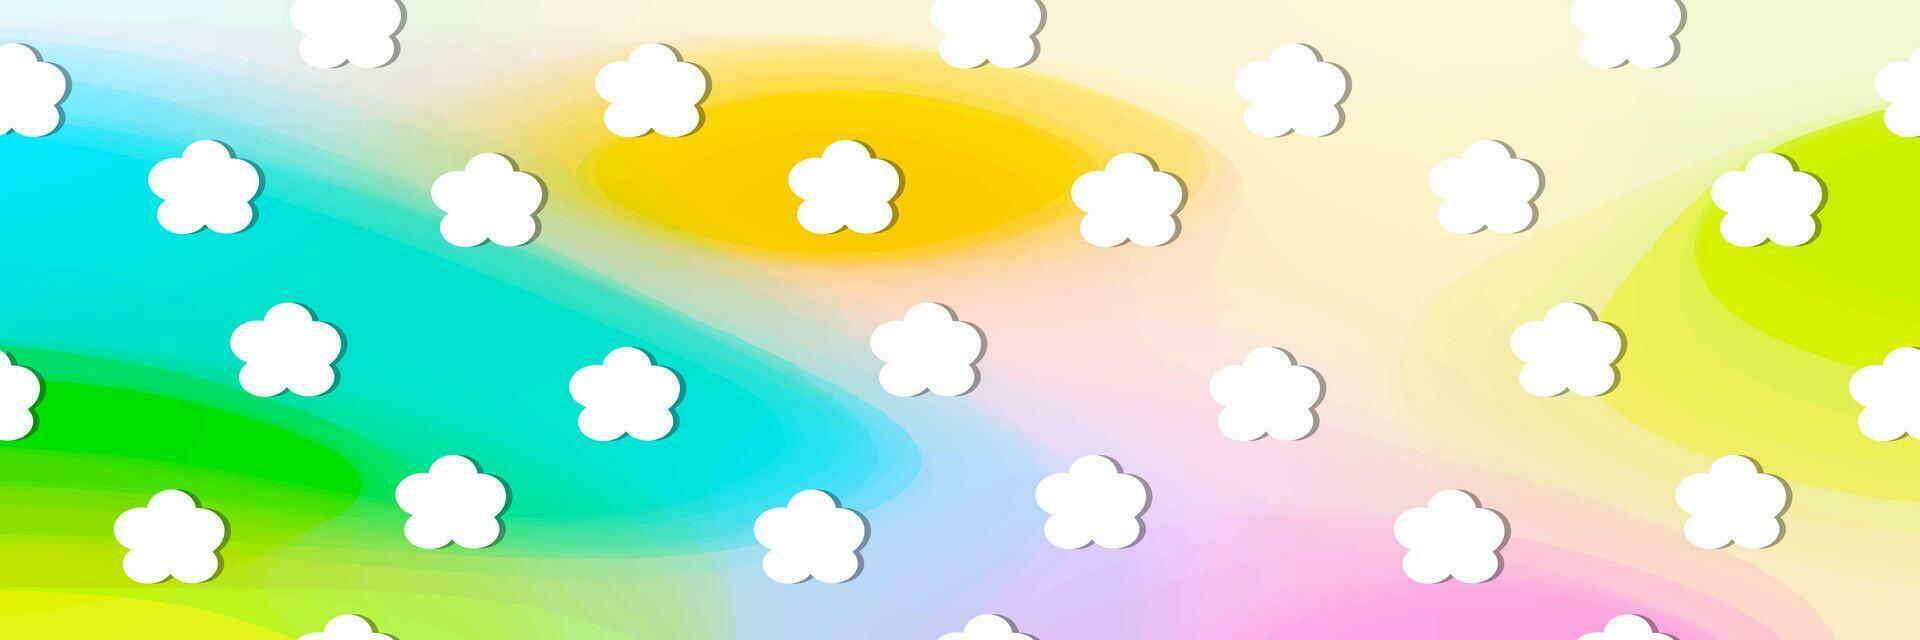 White clouds web header, template background vector